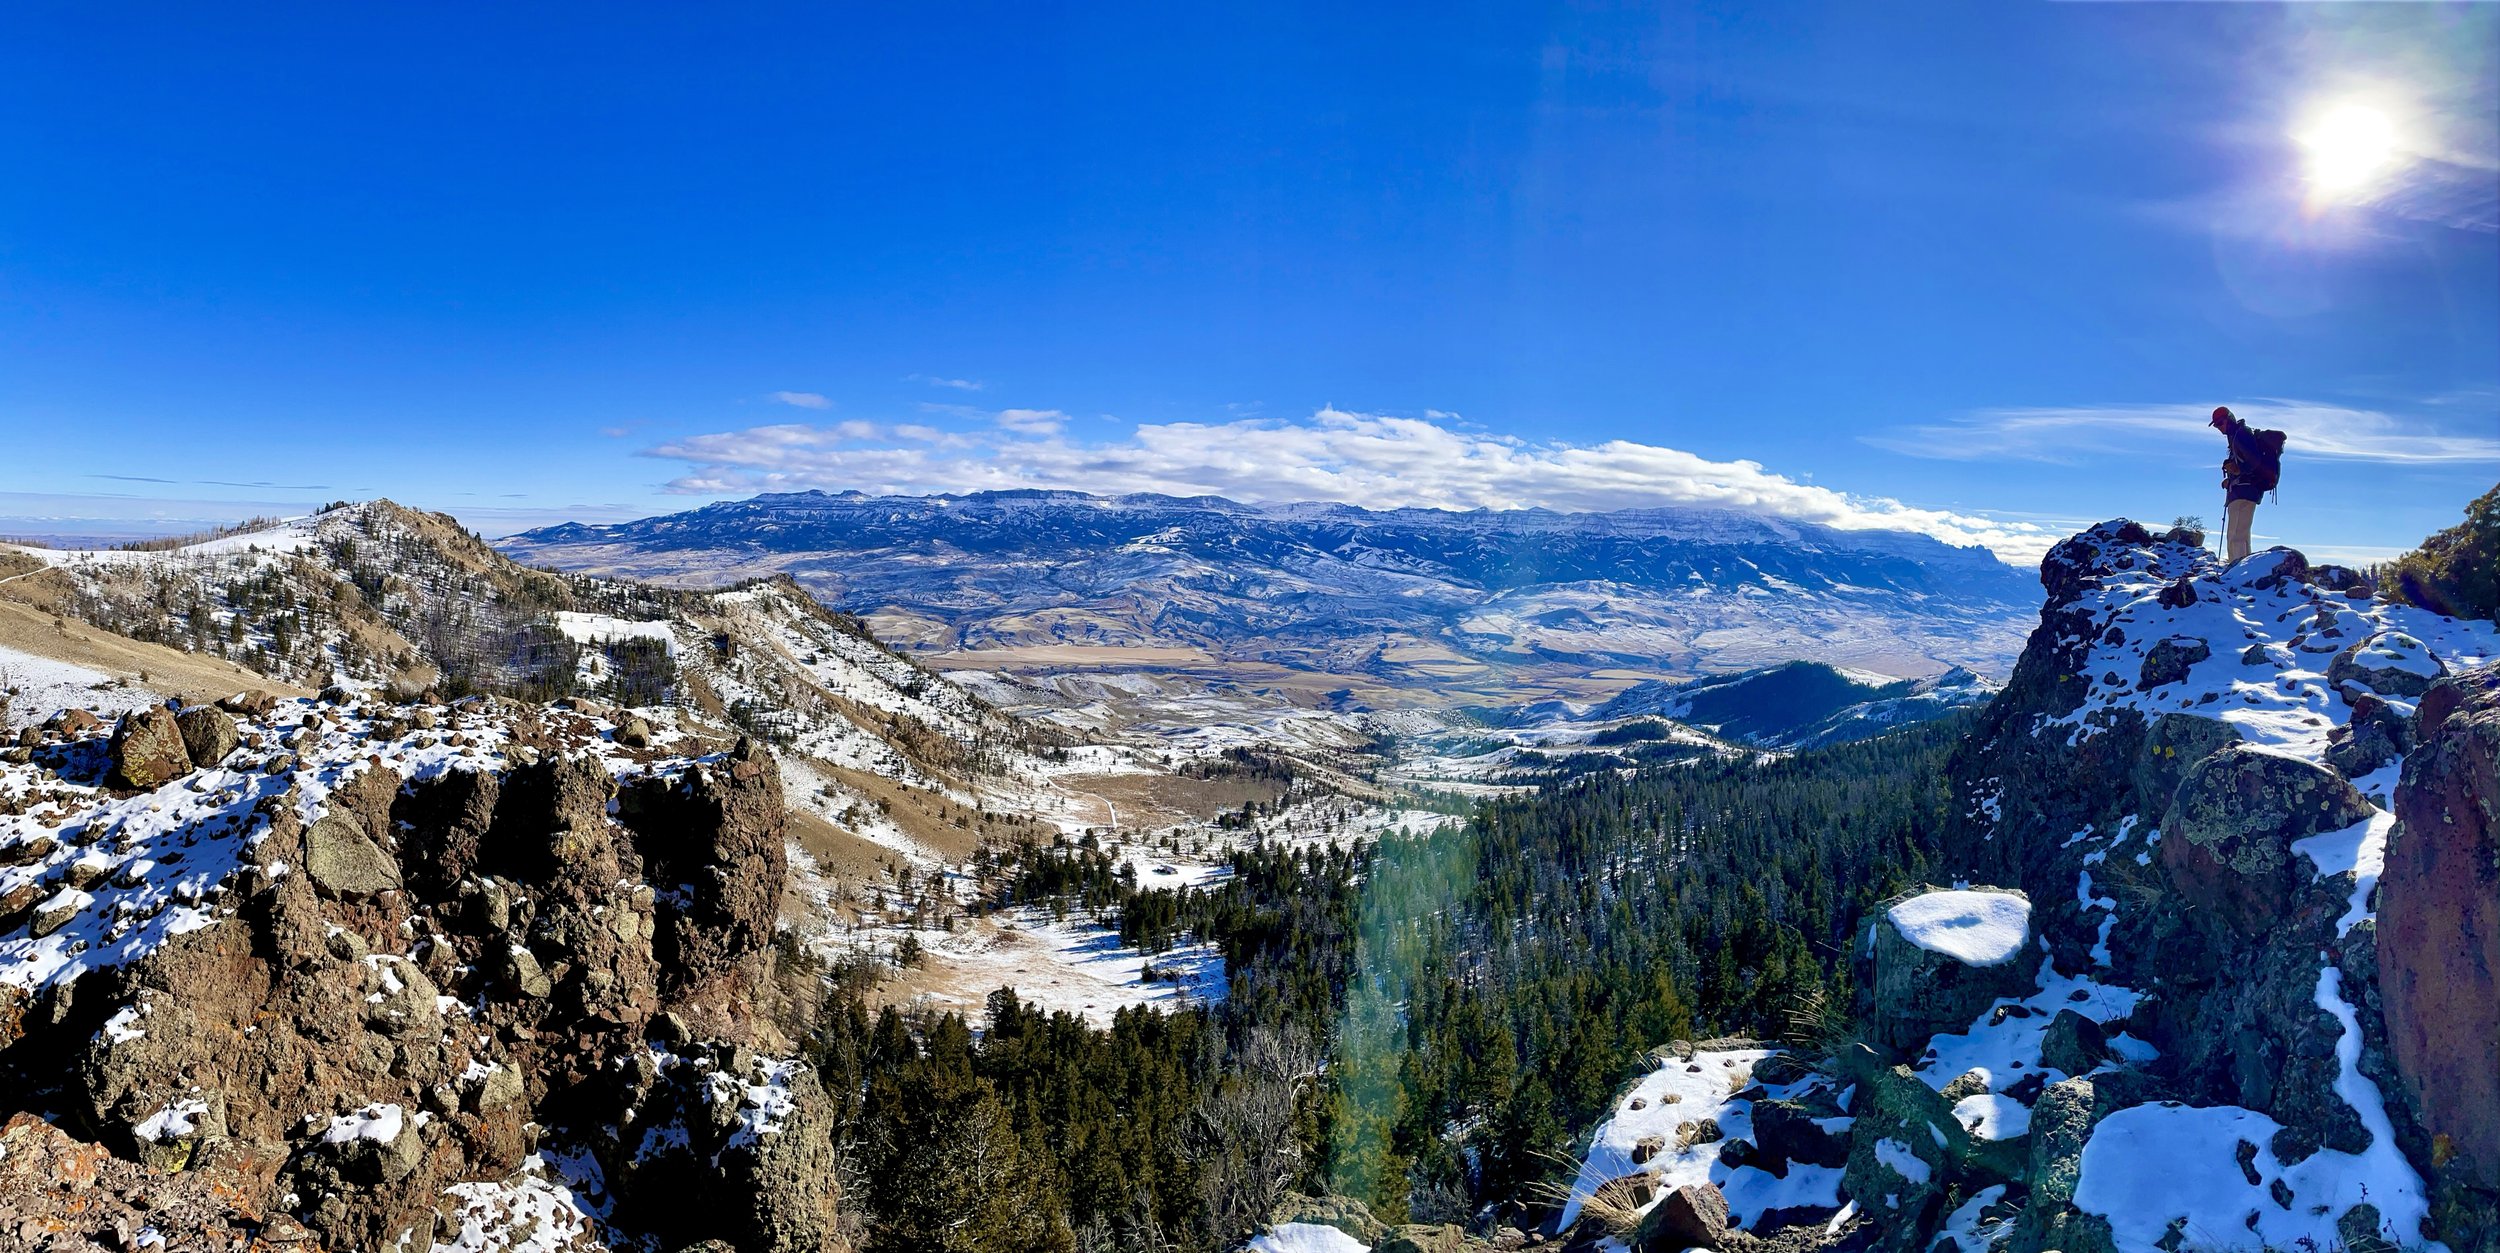  Winter 2021 - View of Will looking down the South Fork Valley of the Shoshone River from one of our wolf GPS clusters on a collaborating ranch. 